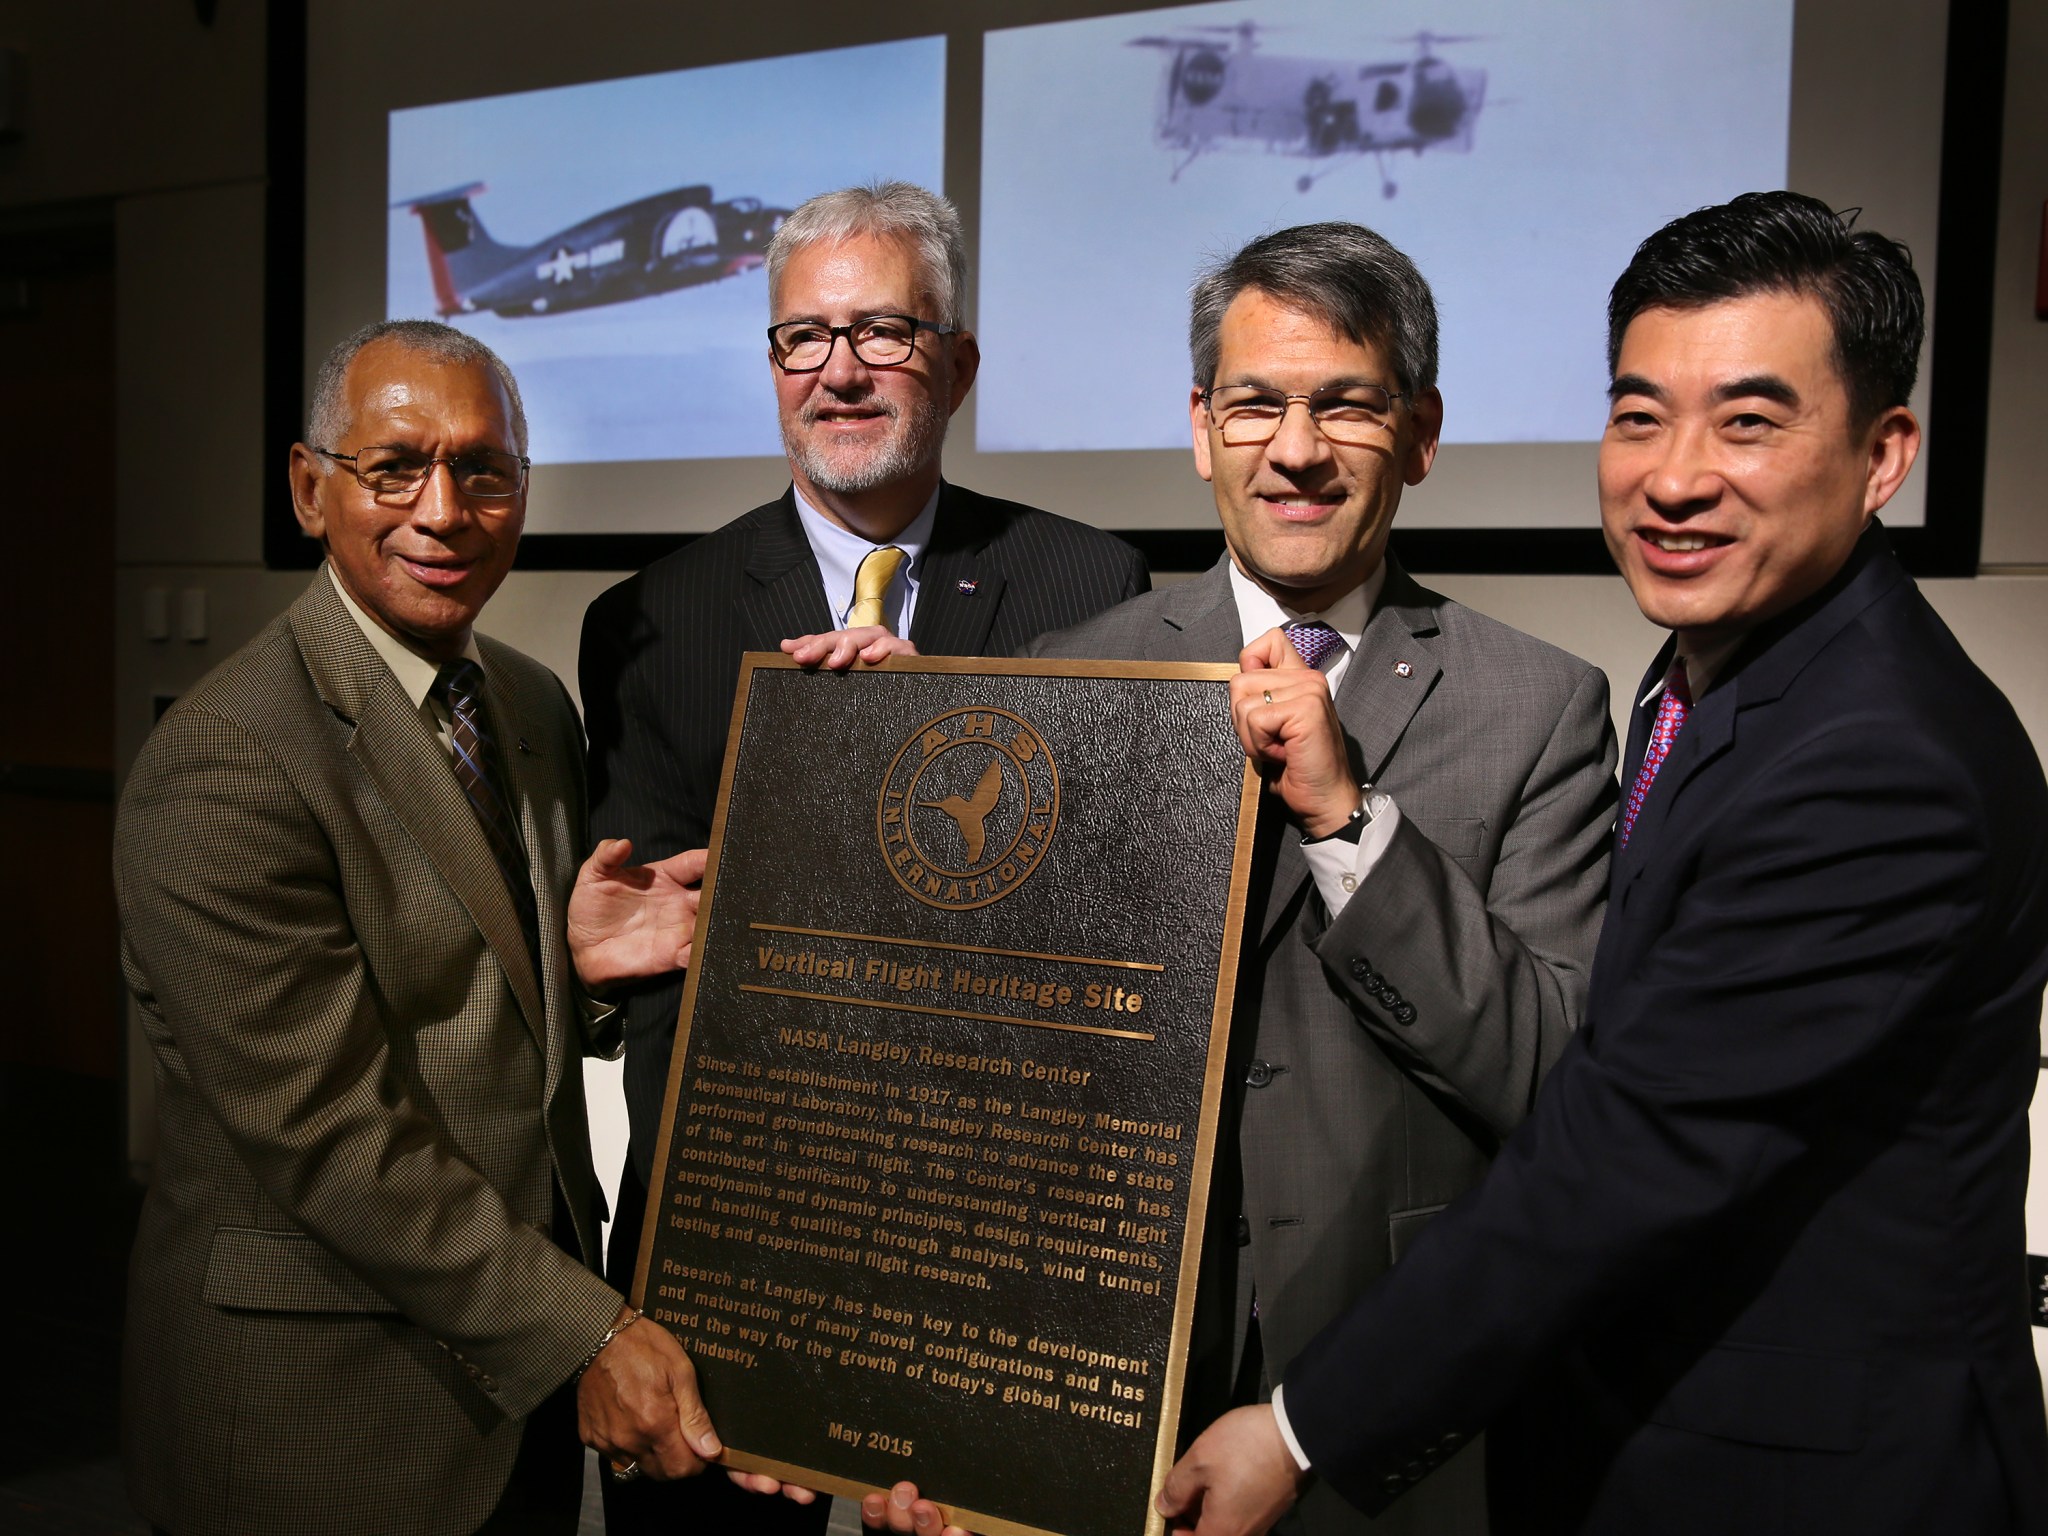 Leaders pose with the plaque naming NASA Langley as an AHS heritage site.